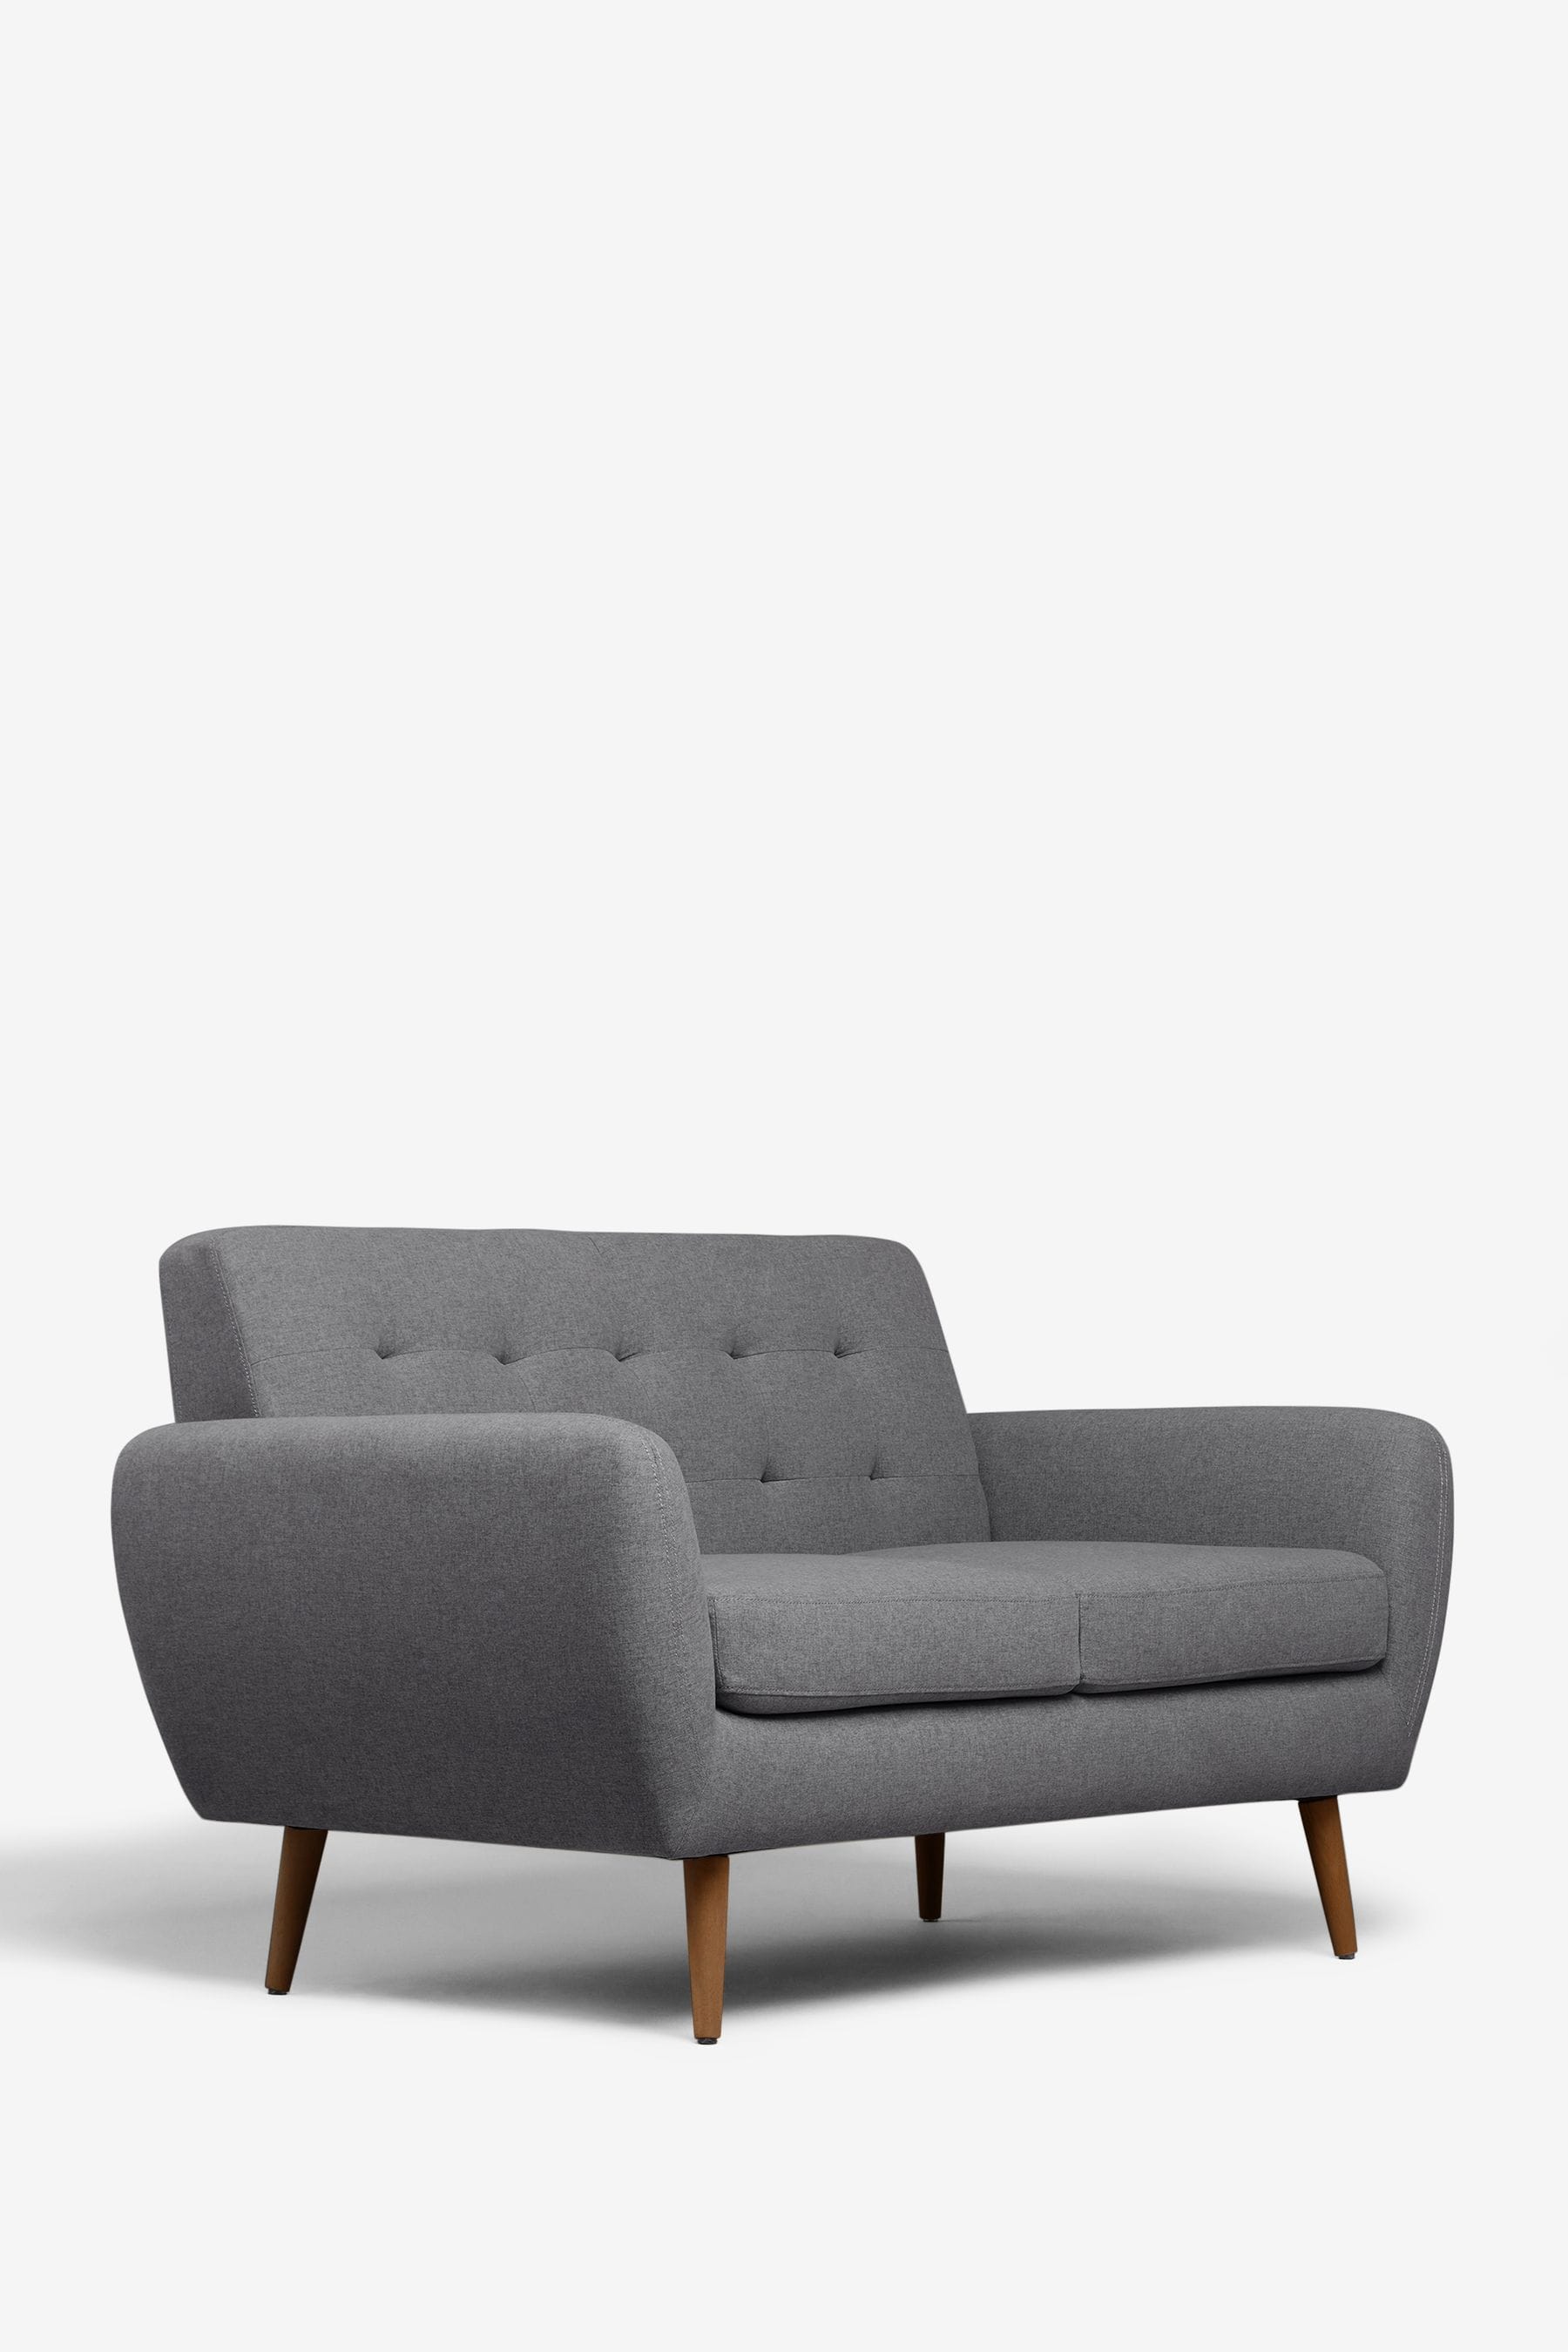 Buy Hyett Compact 2 Seater Sofa In A Box From Next Ireland